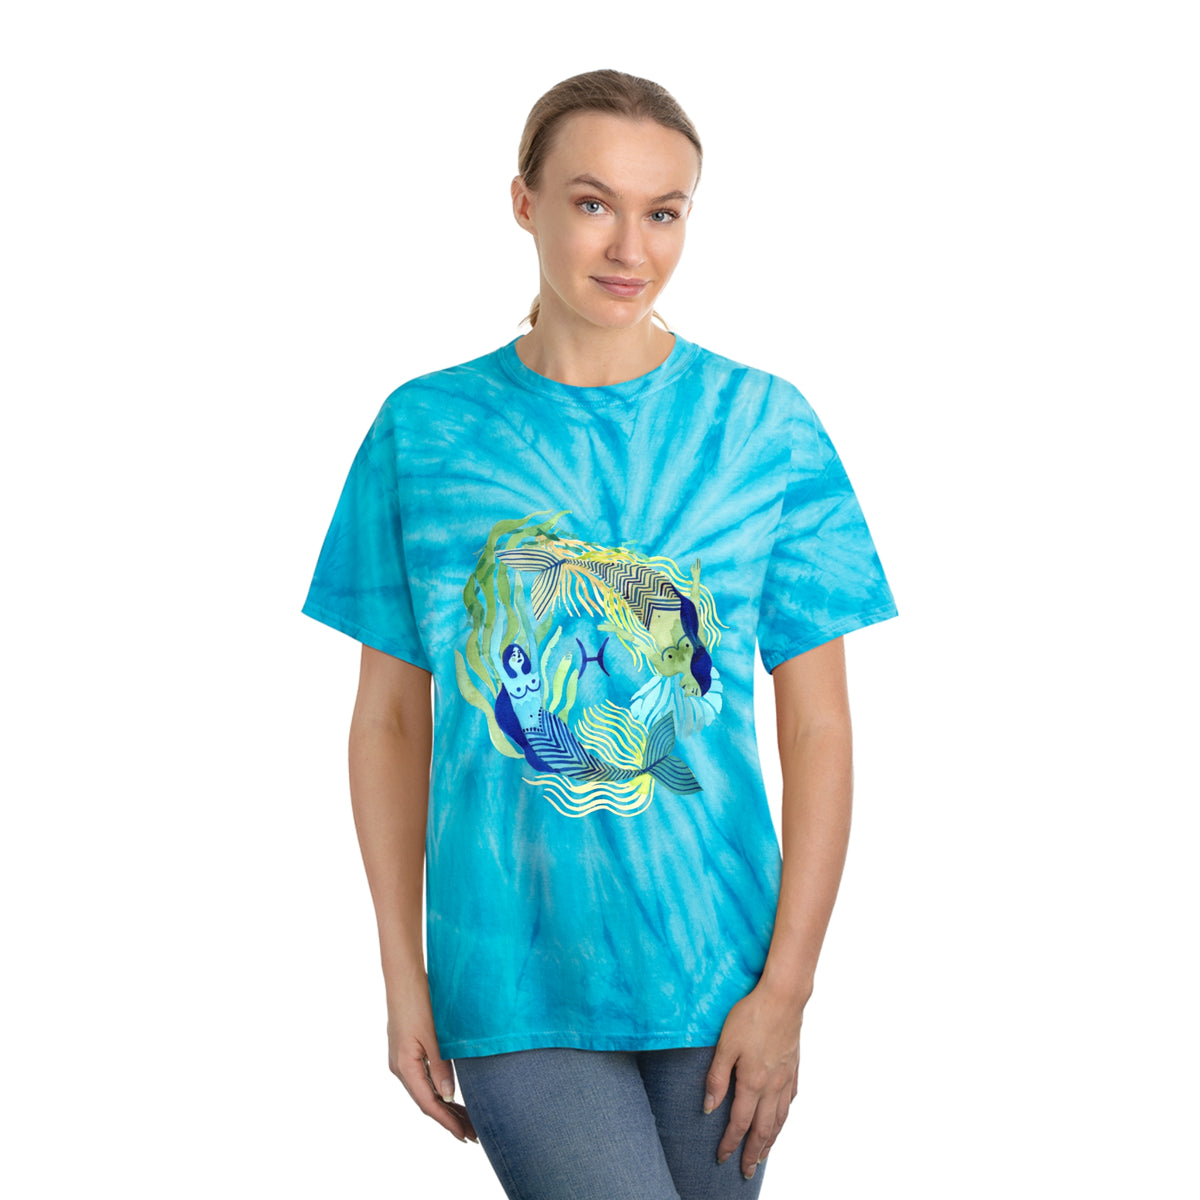 Pisces Perfection: The Fish Tie Dye Tee